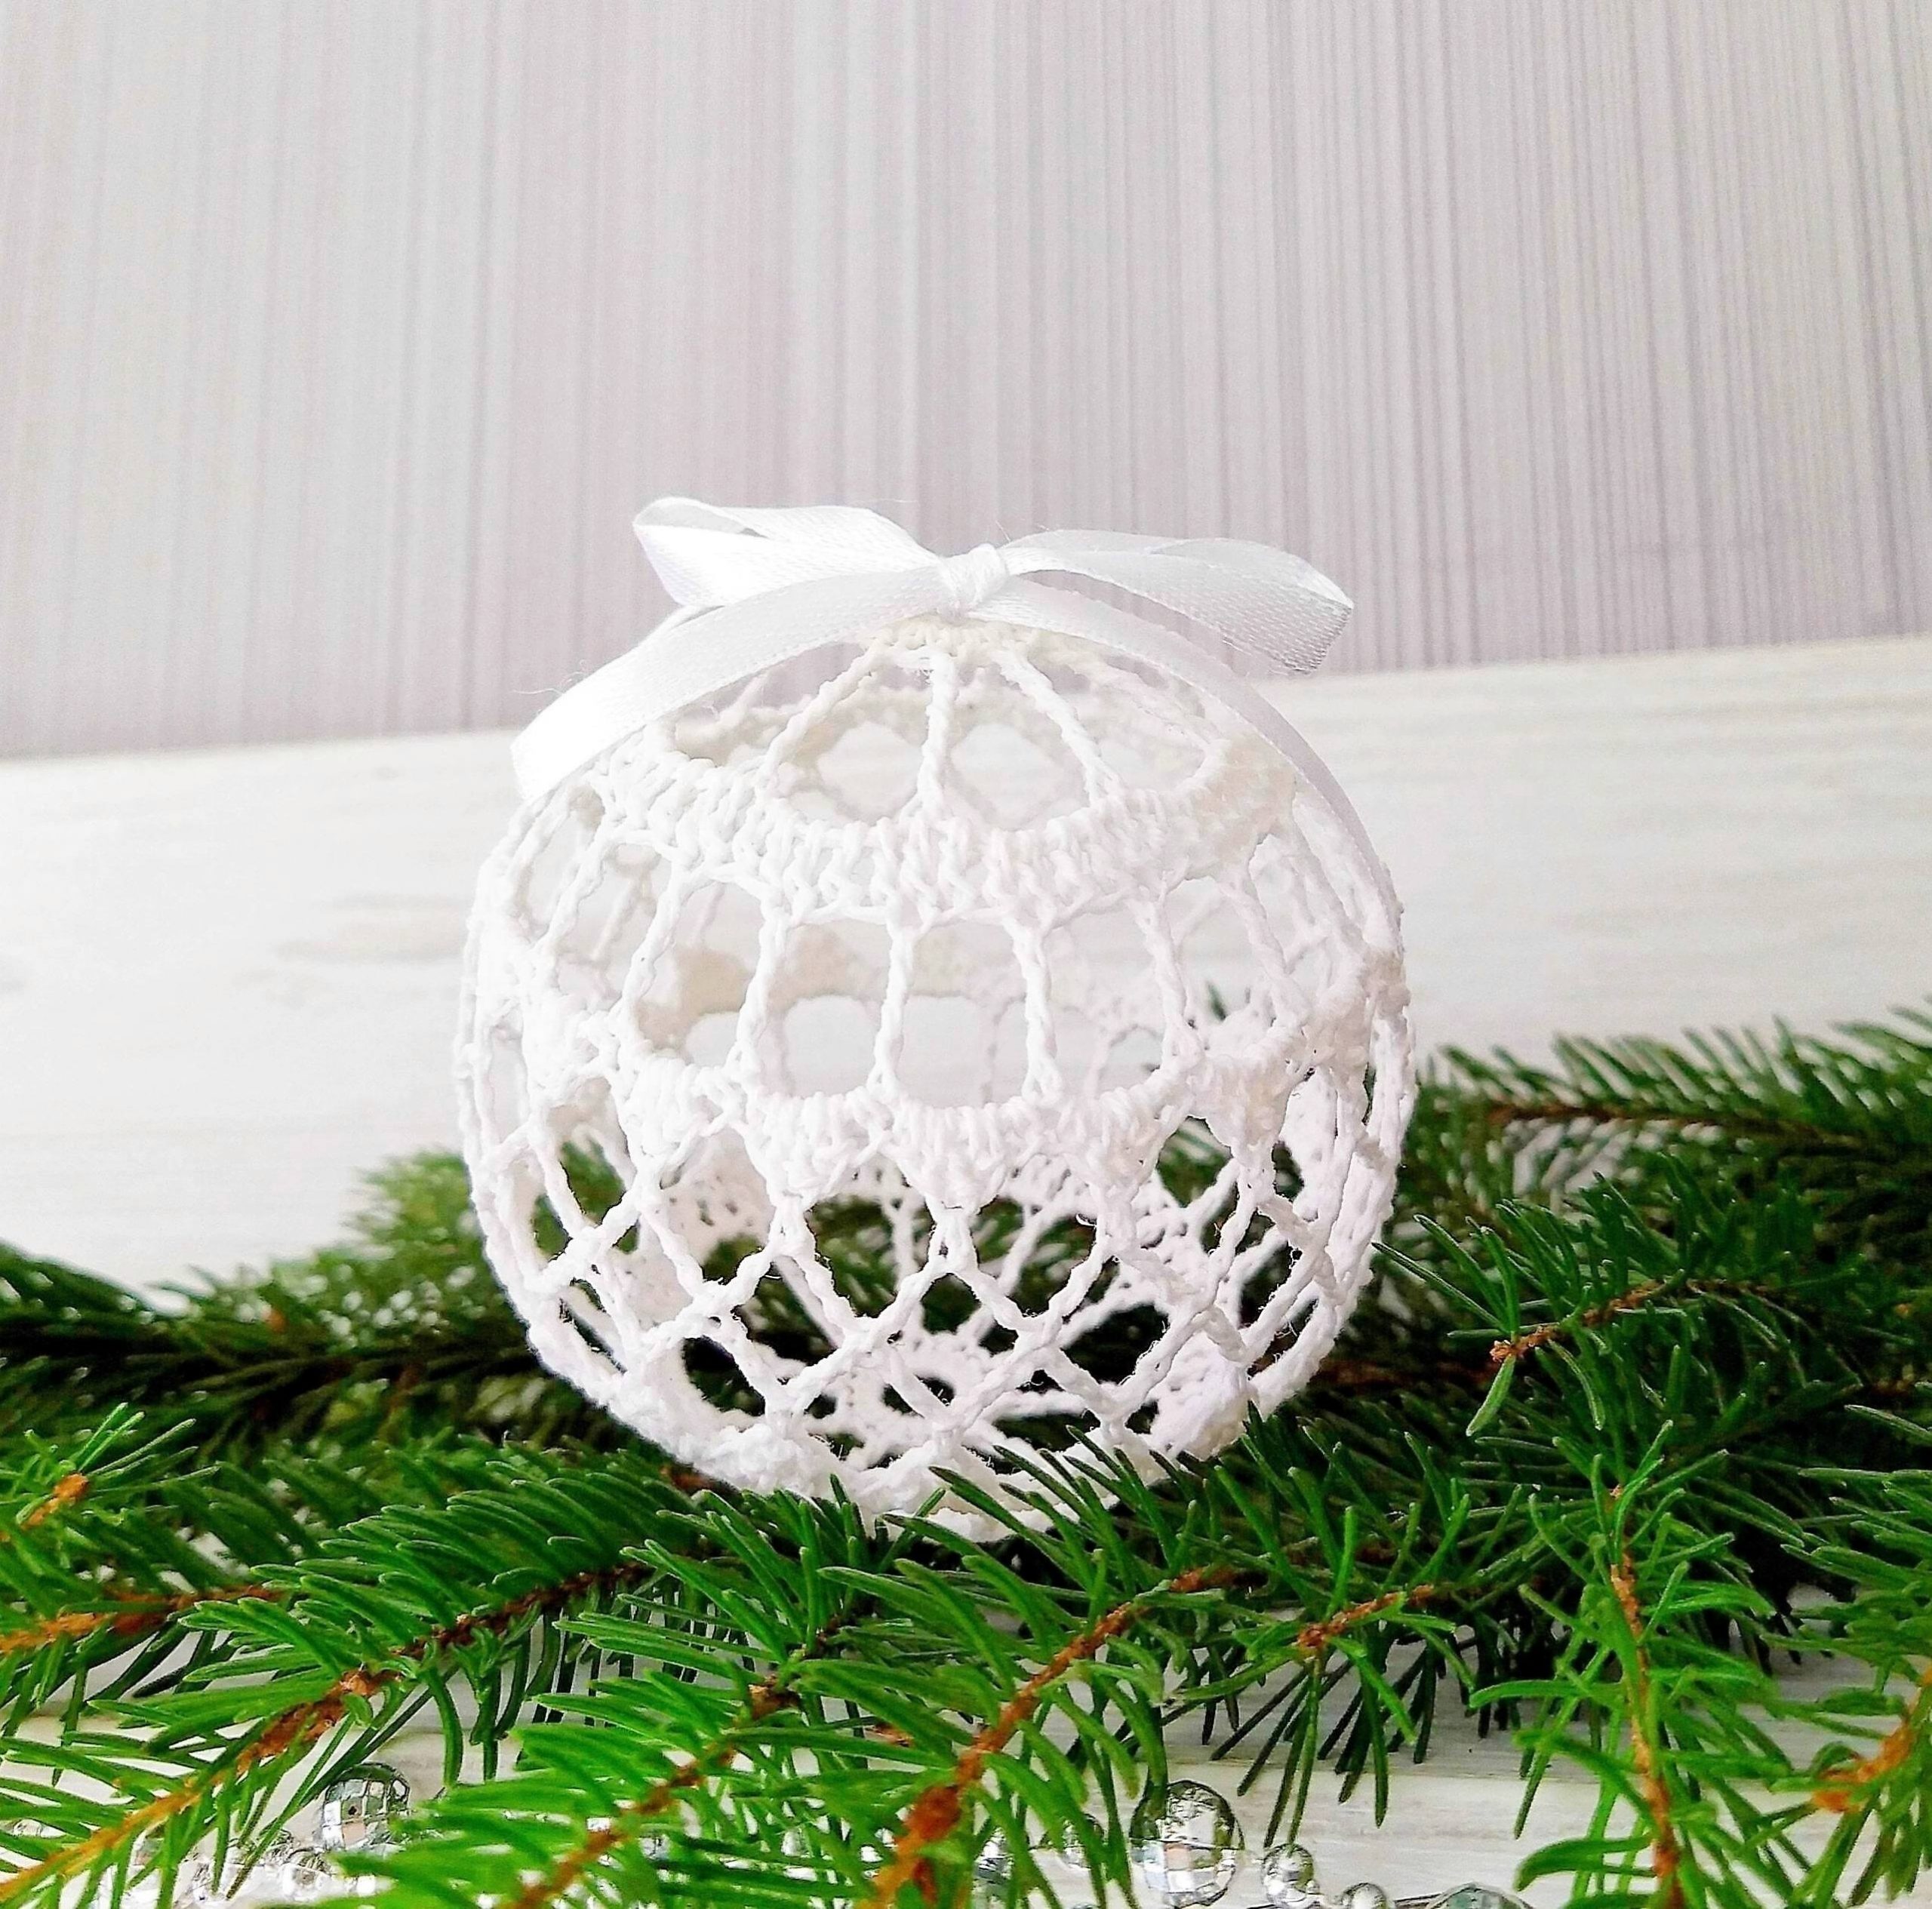 White Christmas balls ornaments gift sets. These amazing crochet handmade Christmas baubles are made from natural thread, then blocked for to stand in a ball shape. You can see through their lacy design because there is no filling inside. Christmas balls 3d look great on Christmas tree or just in decorative plate on the table. Also Christmas baubles can make amazing Christmas gift for beloved person. 4 different design available to pick from when placing your order. I ship these in a solid box.